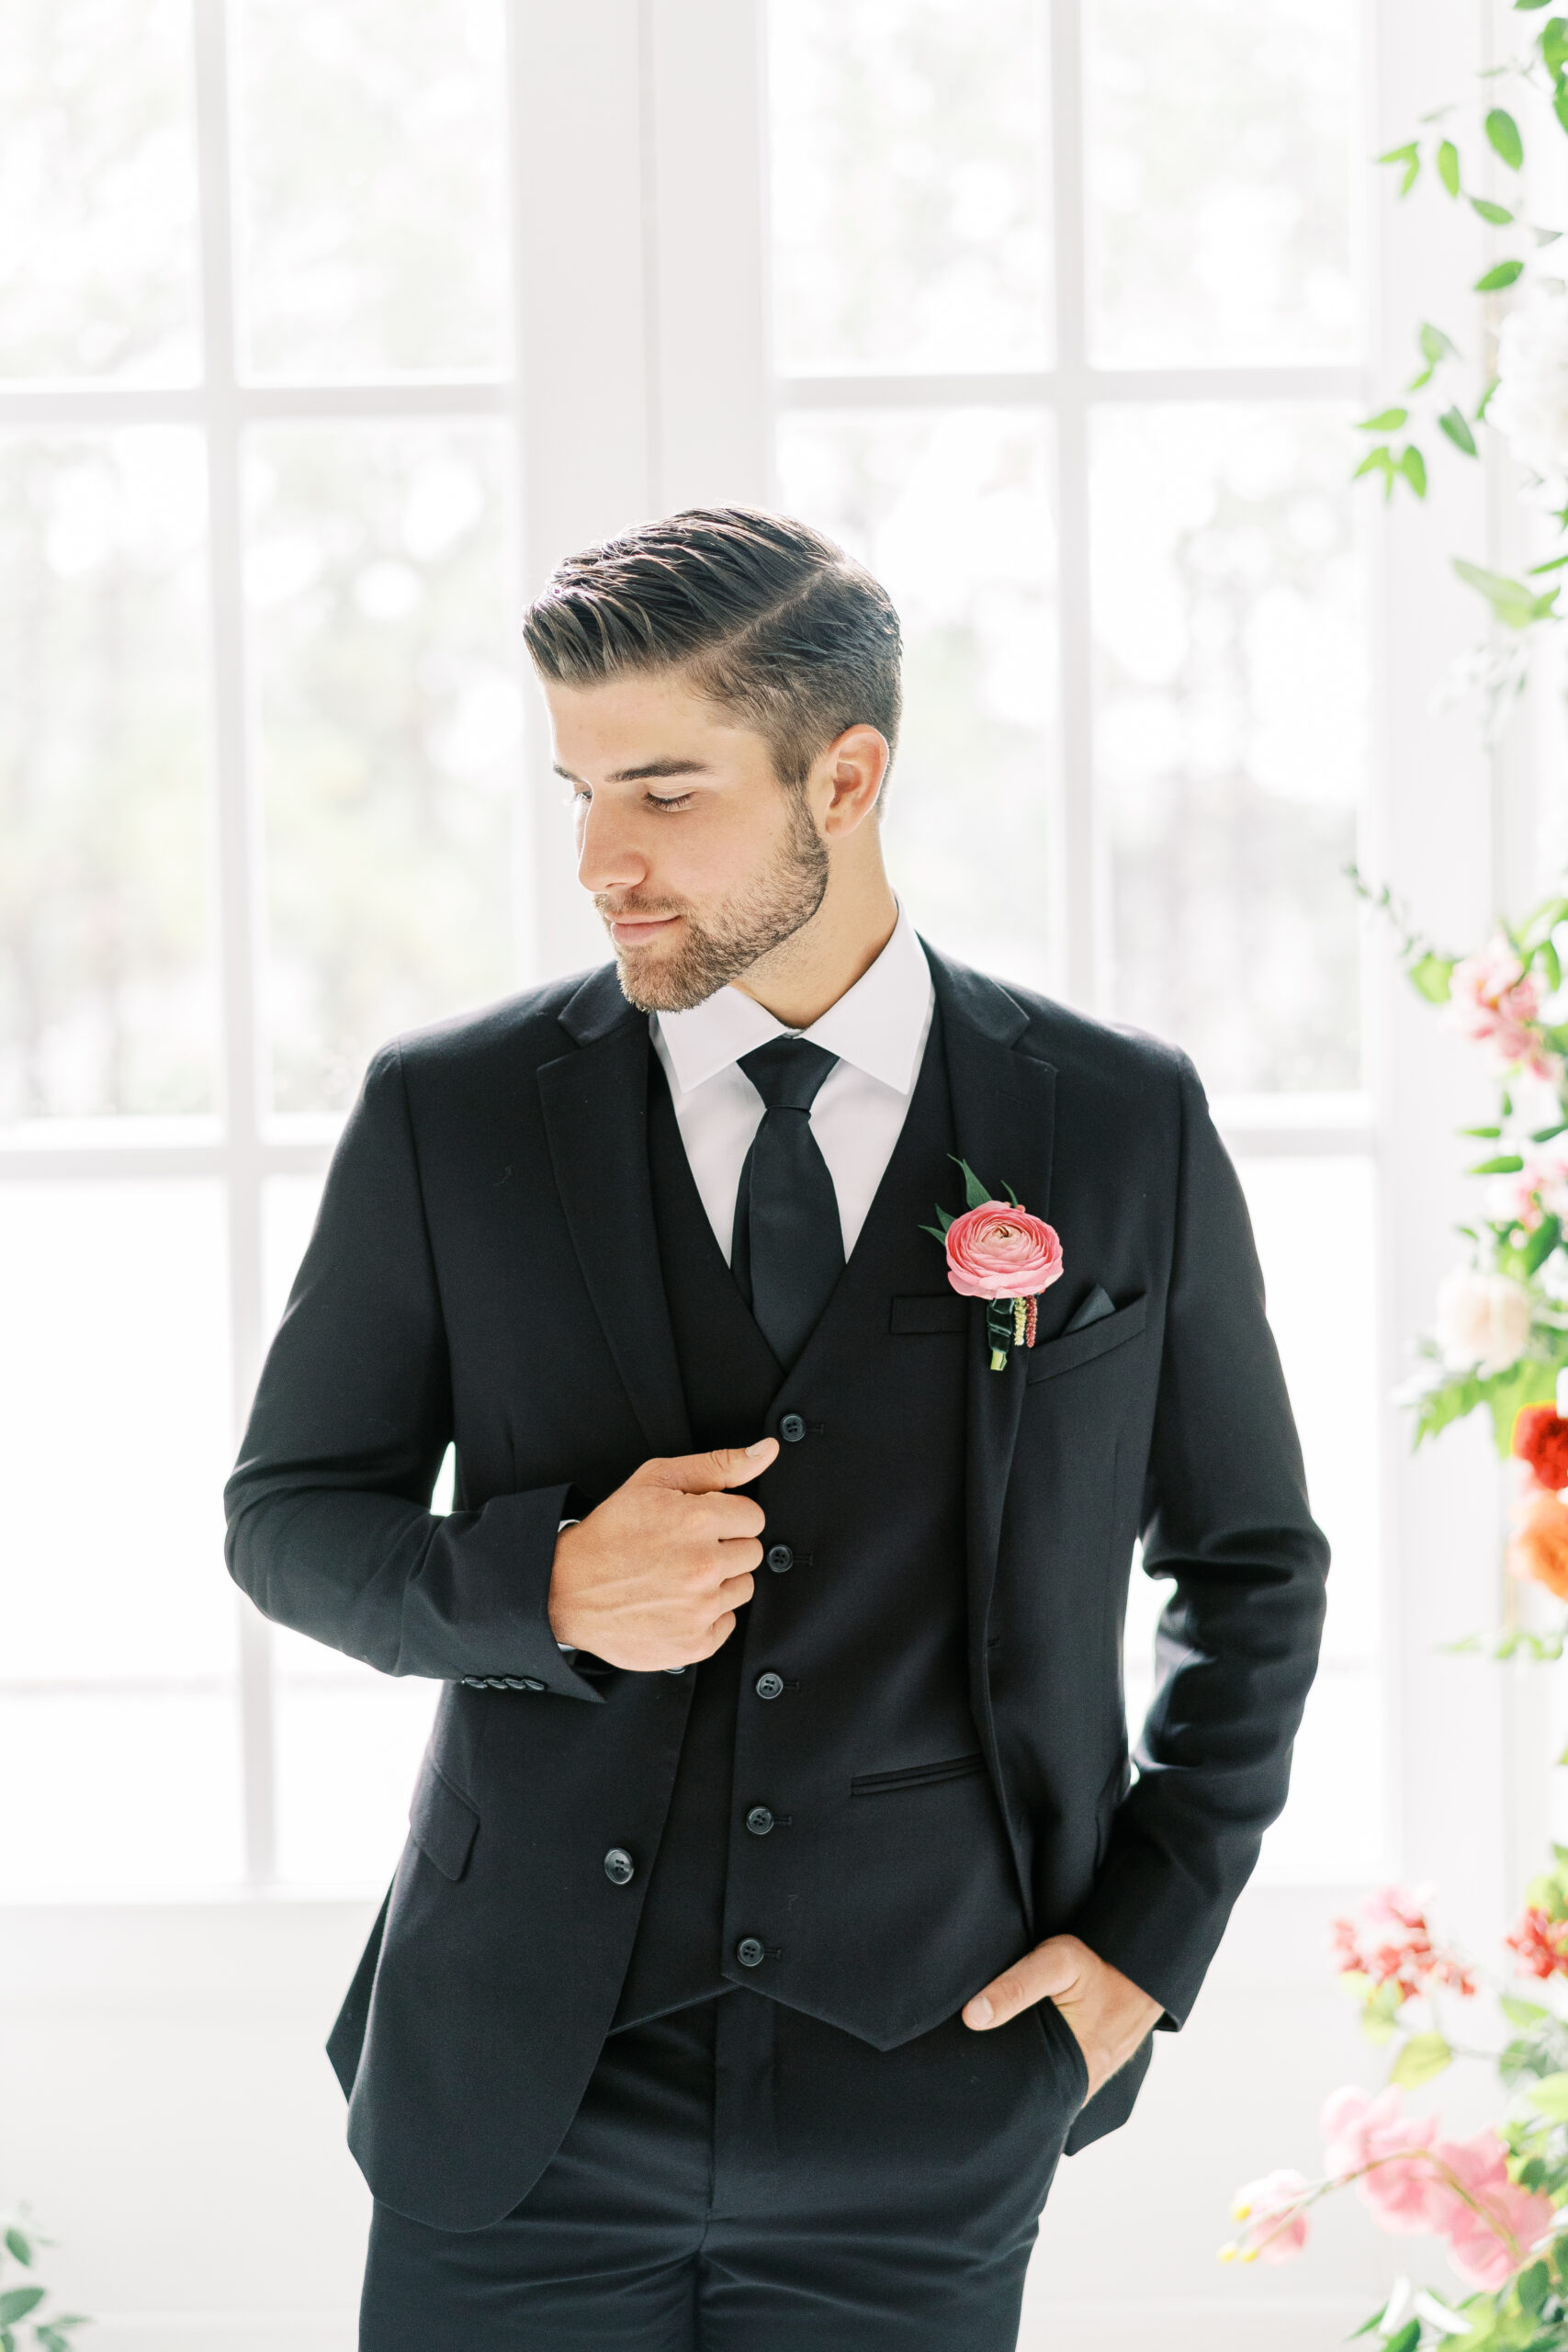 A groom in a black suit posing in a well-lit room